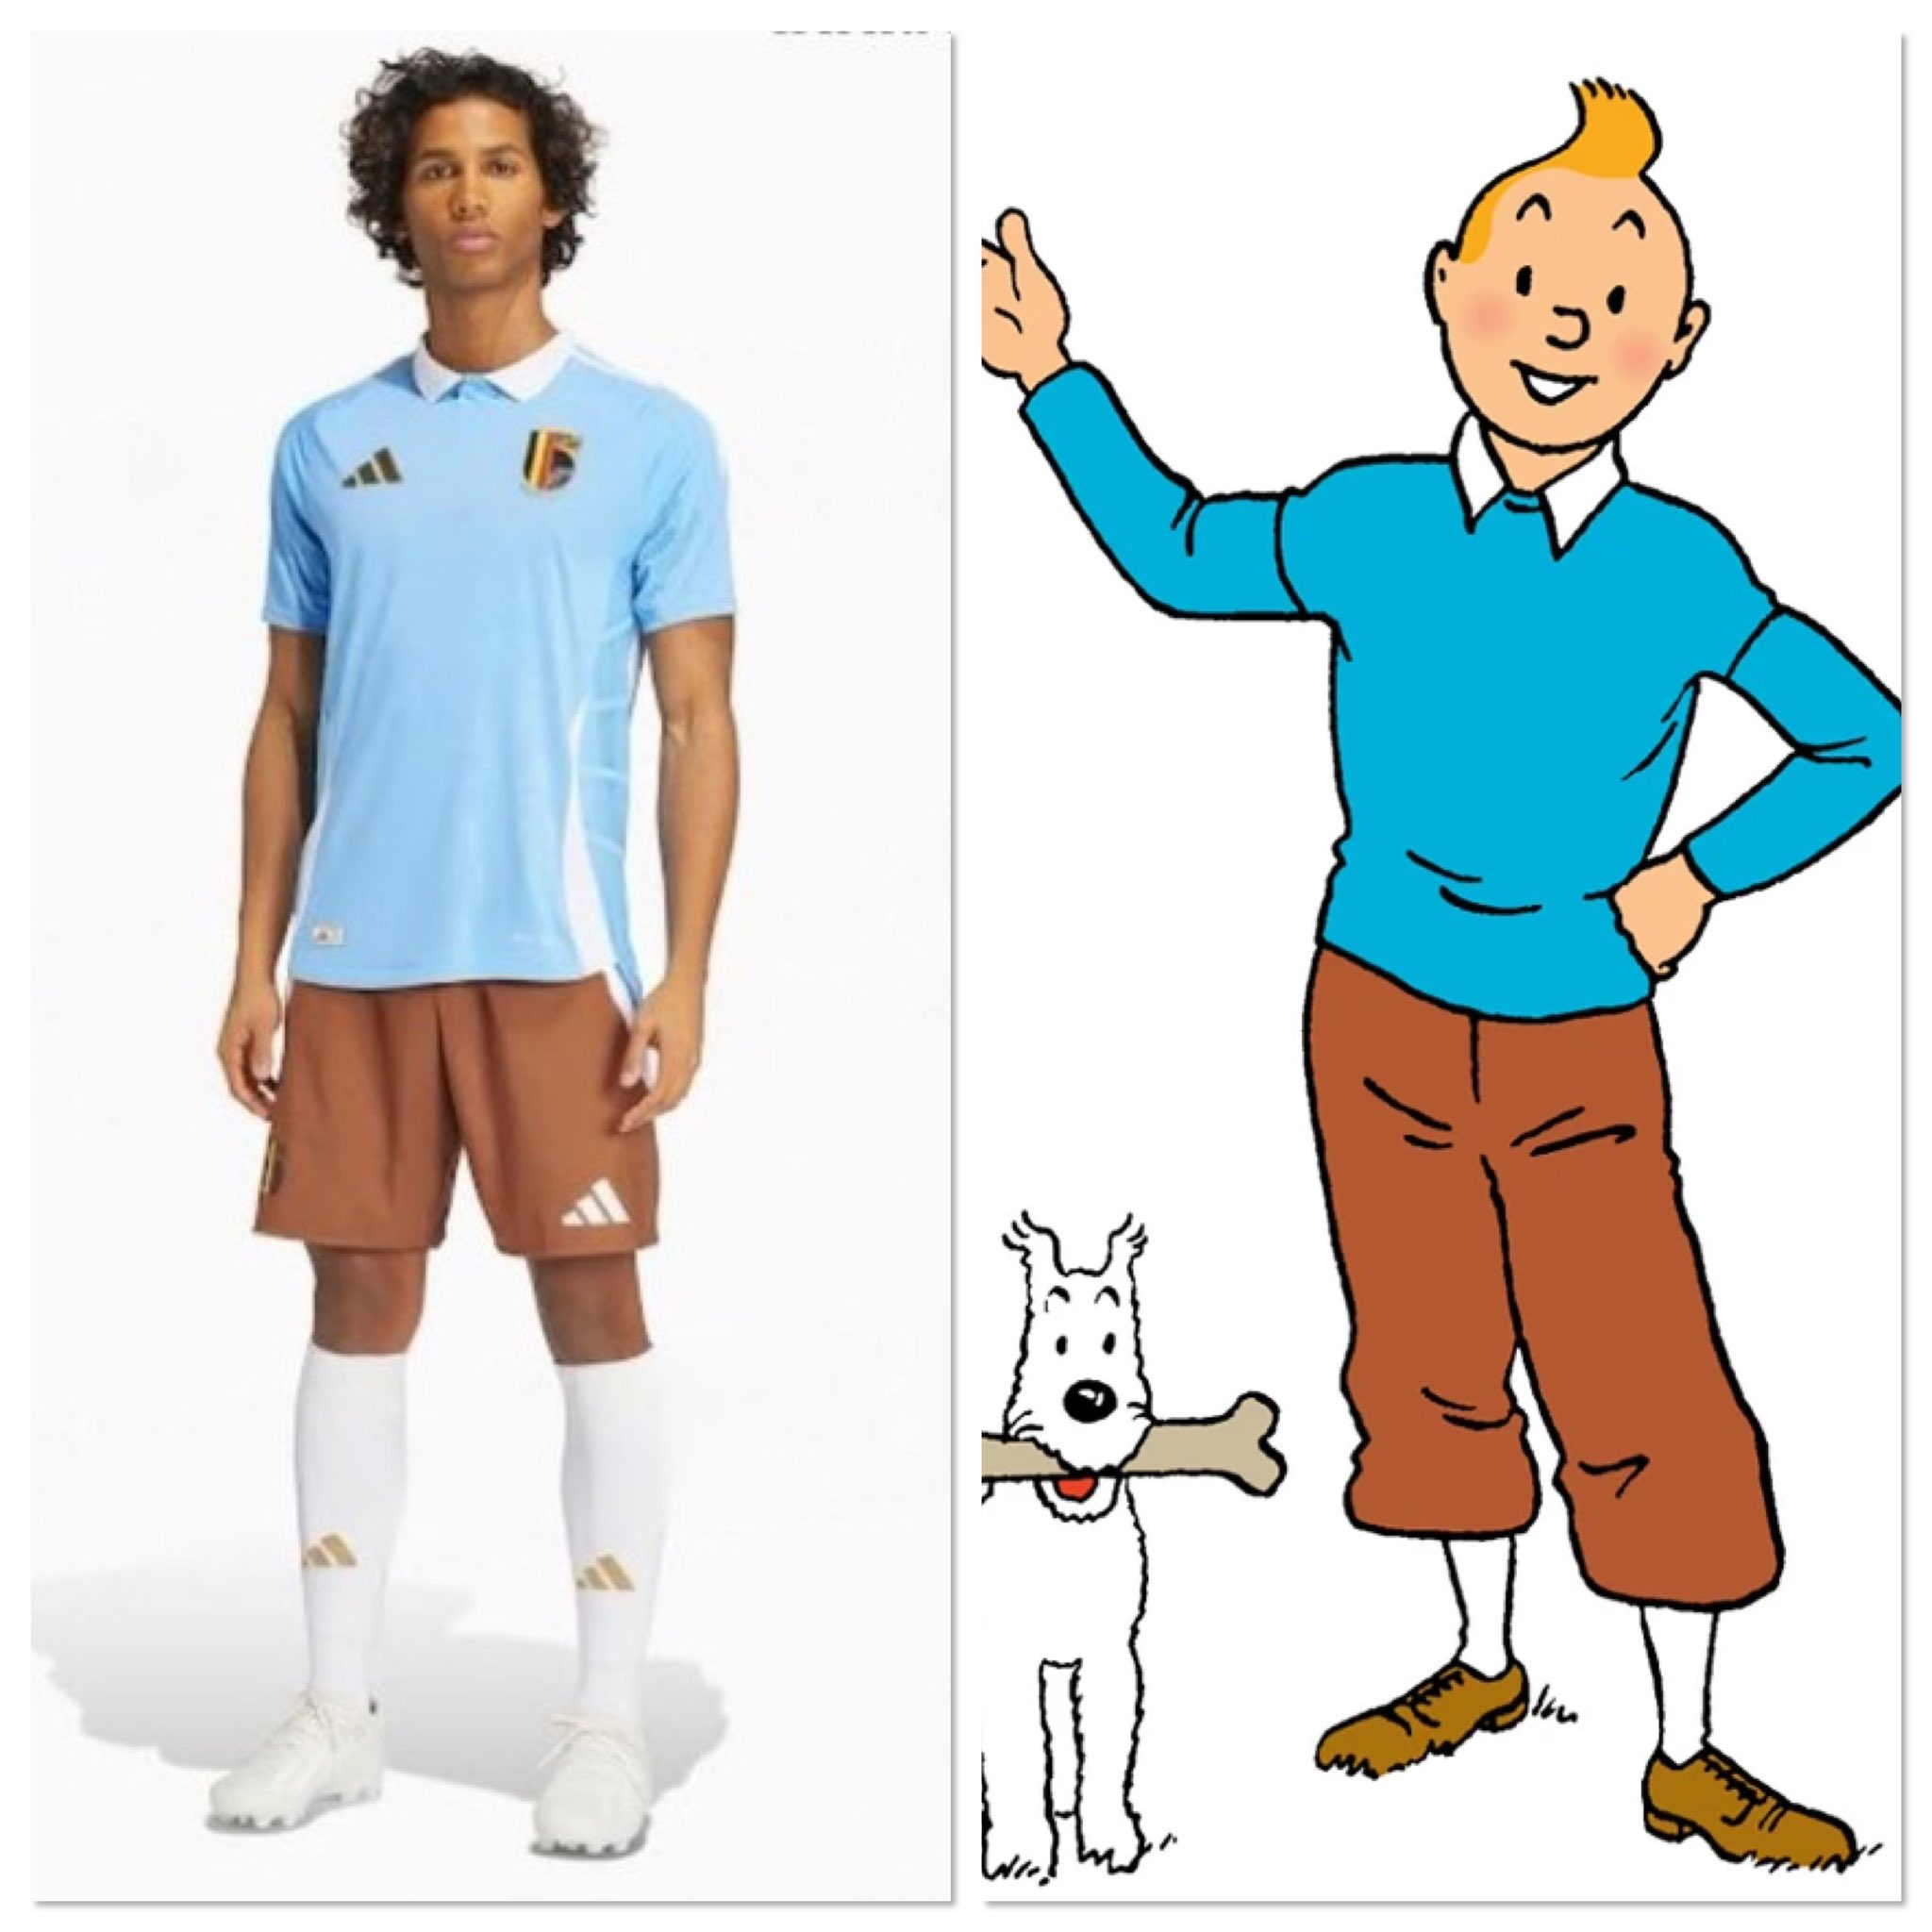 Fans Go Wild Over Tintin-Themed Belgium Away Kit for Euro 2024: ‘Instant Classic’